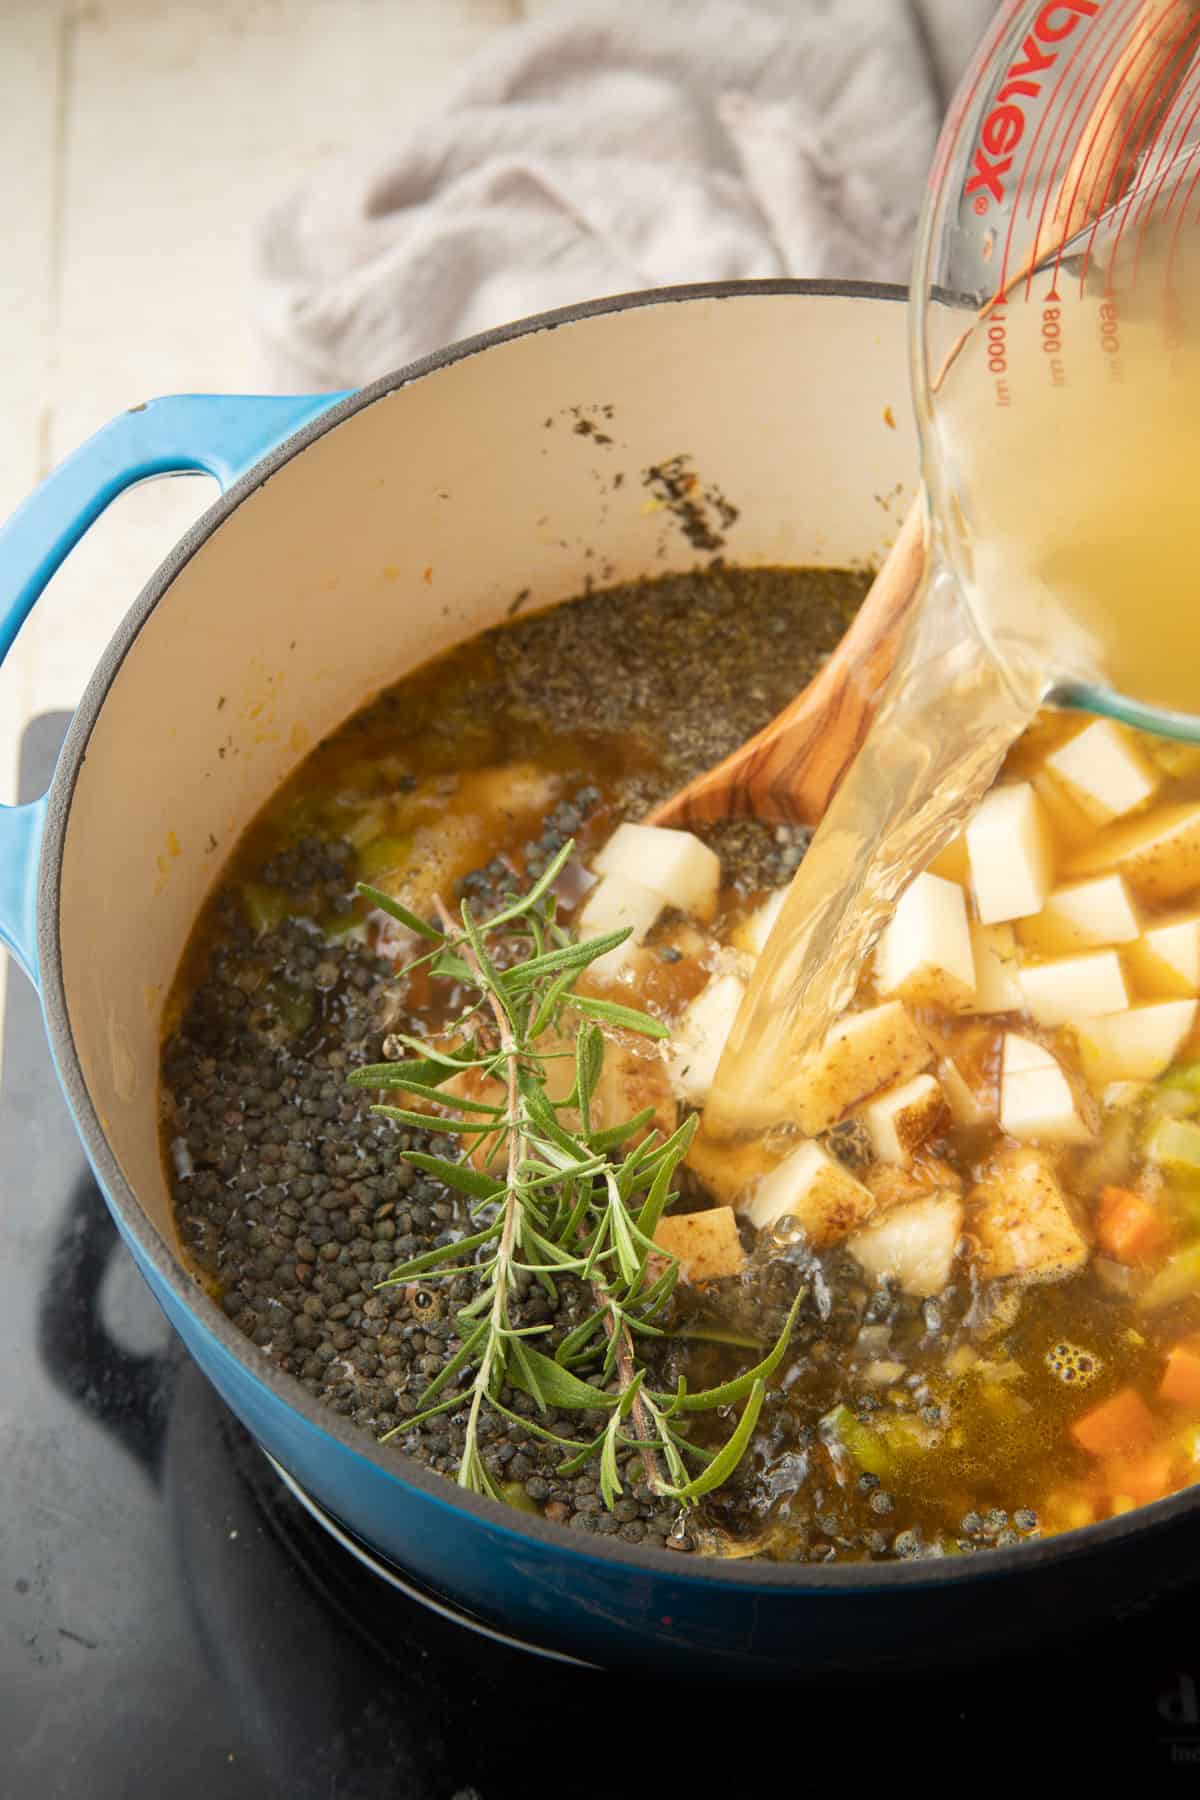 Broth being poured into a pot of French lentils, potatoes, vegetables and herbs.